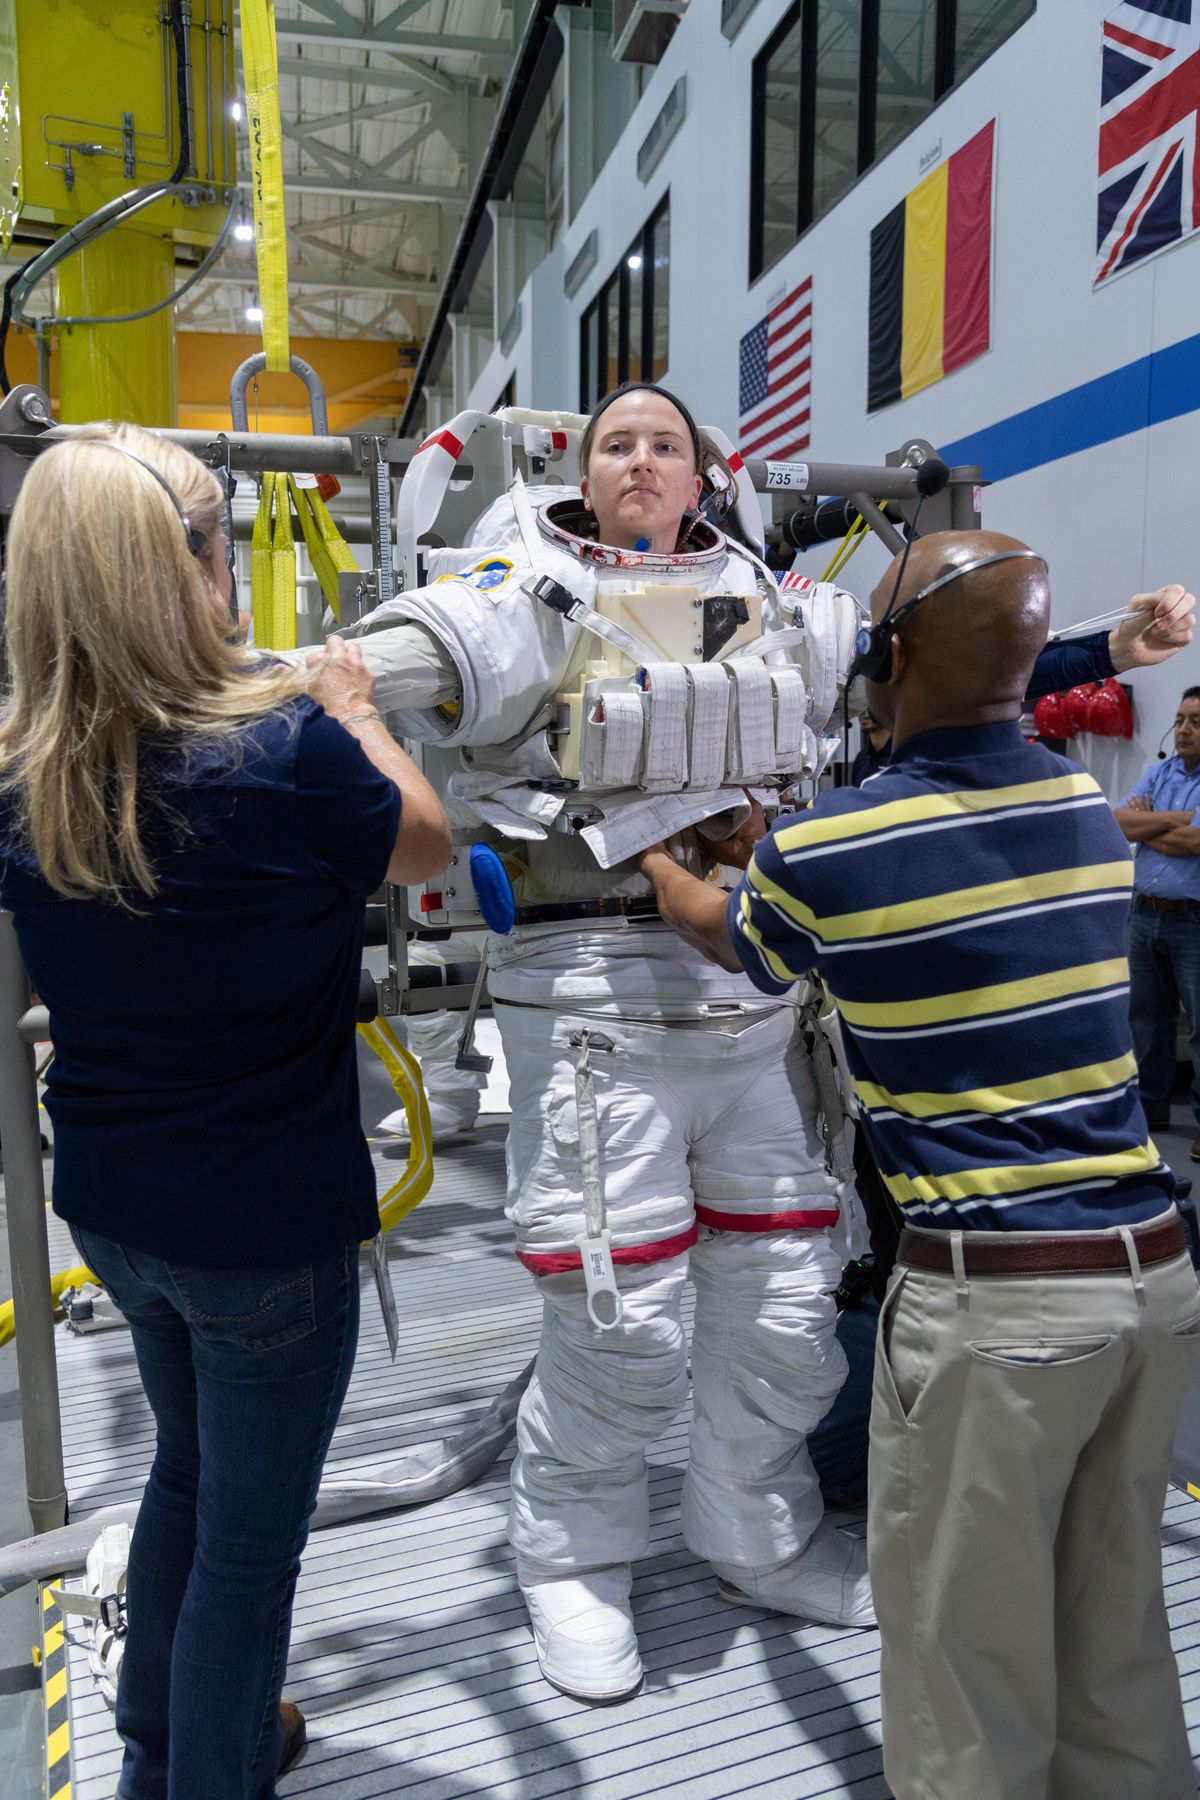 Richland’s Kayla Barron gets suited up for a space-walk training exercise in this November 2018 photo provided by NASA. Barron graduated from her two-year training on Friday and is now eligible for space flight. (Robert Markowitz - NASA - Johnson Space Center)